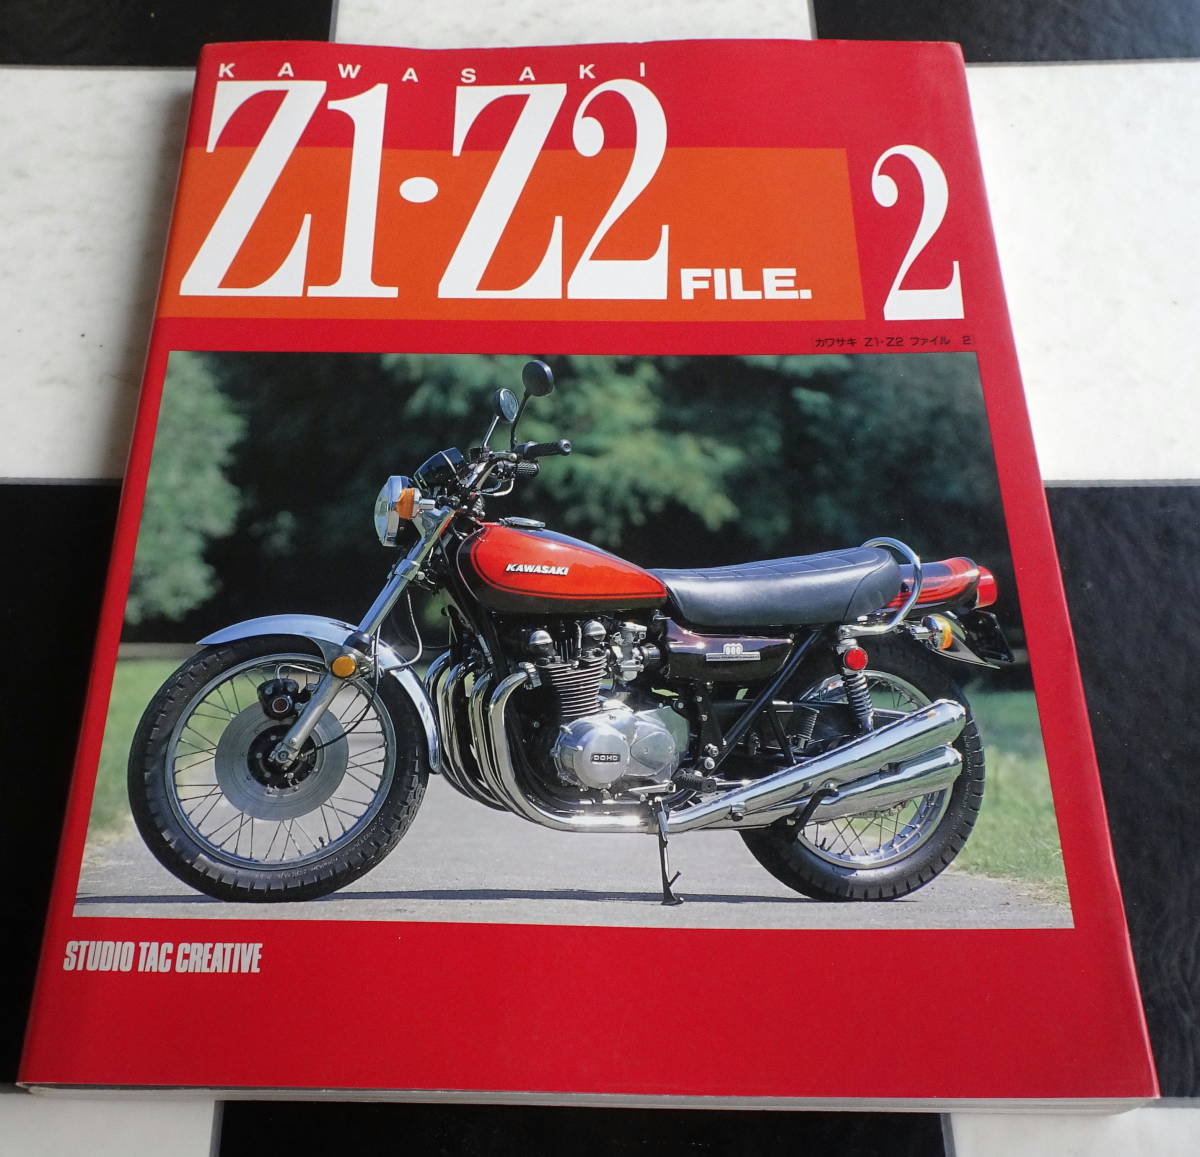 【Kawasaki】Z1 ・Z2 File.2 カワサキ ゼット ファイル 900RS SUPER FOUR メンテナンス Z1 Assembly&Preparation Manual_画像1